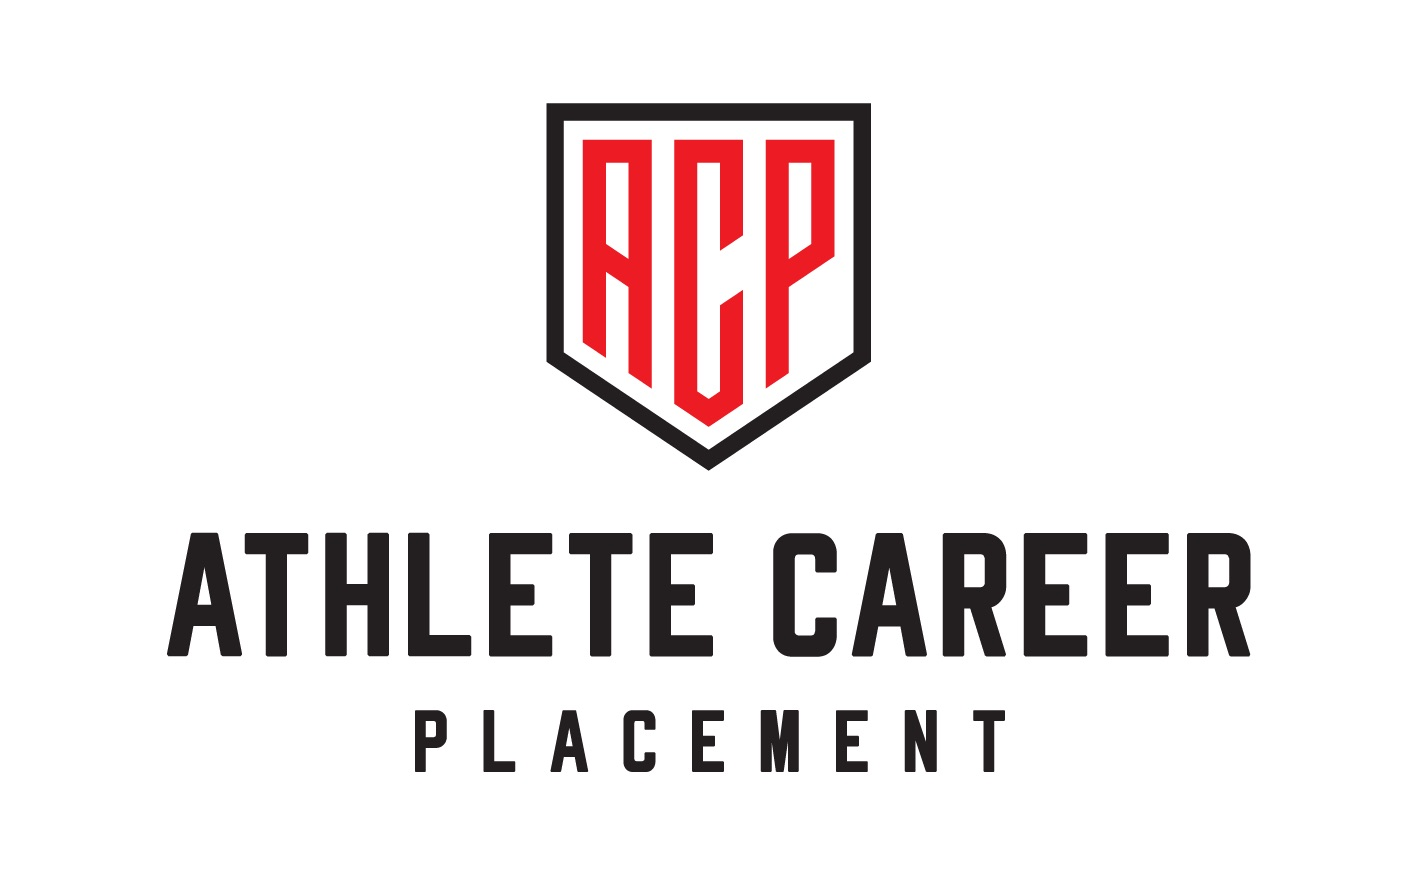 Athlete Career Placement Logo